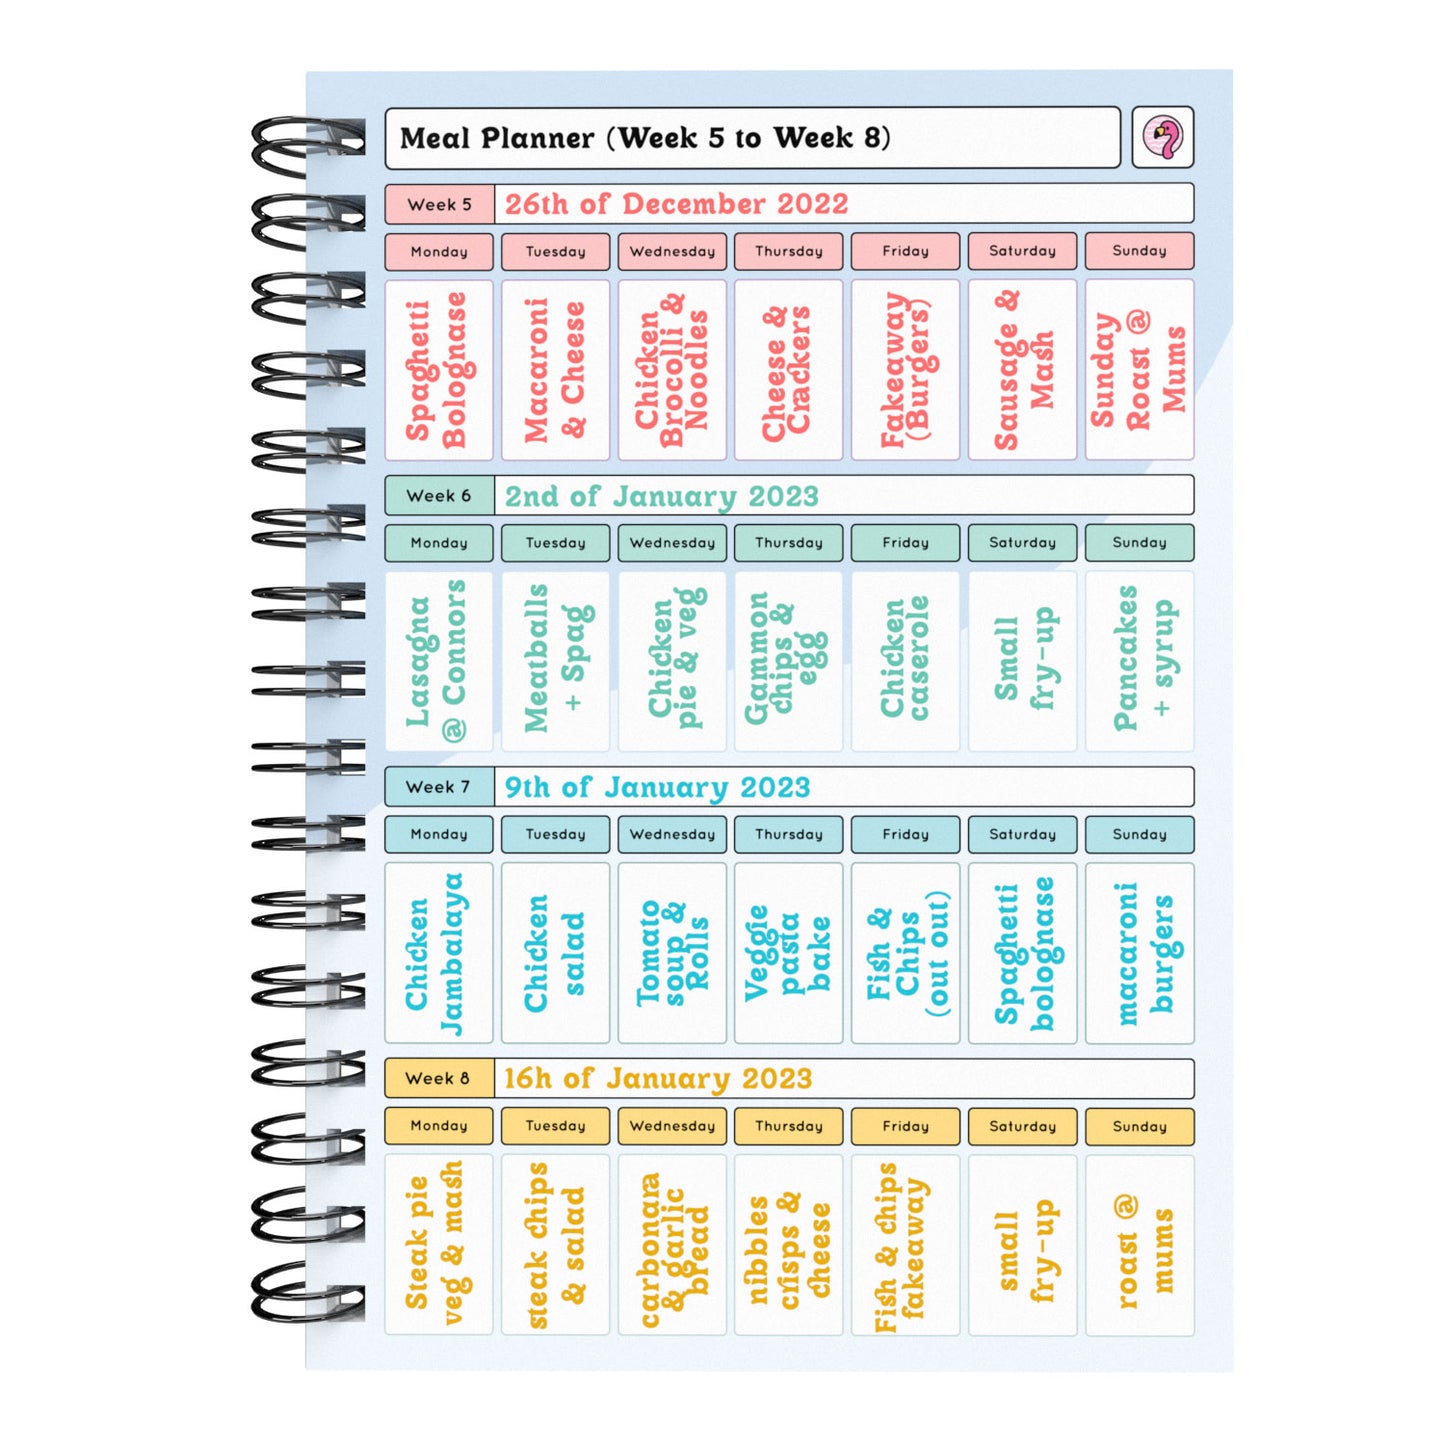 Food Diary - C35 - Calorie Counting